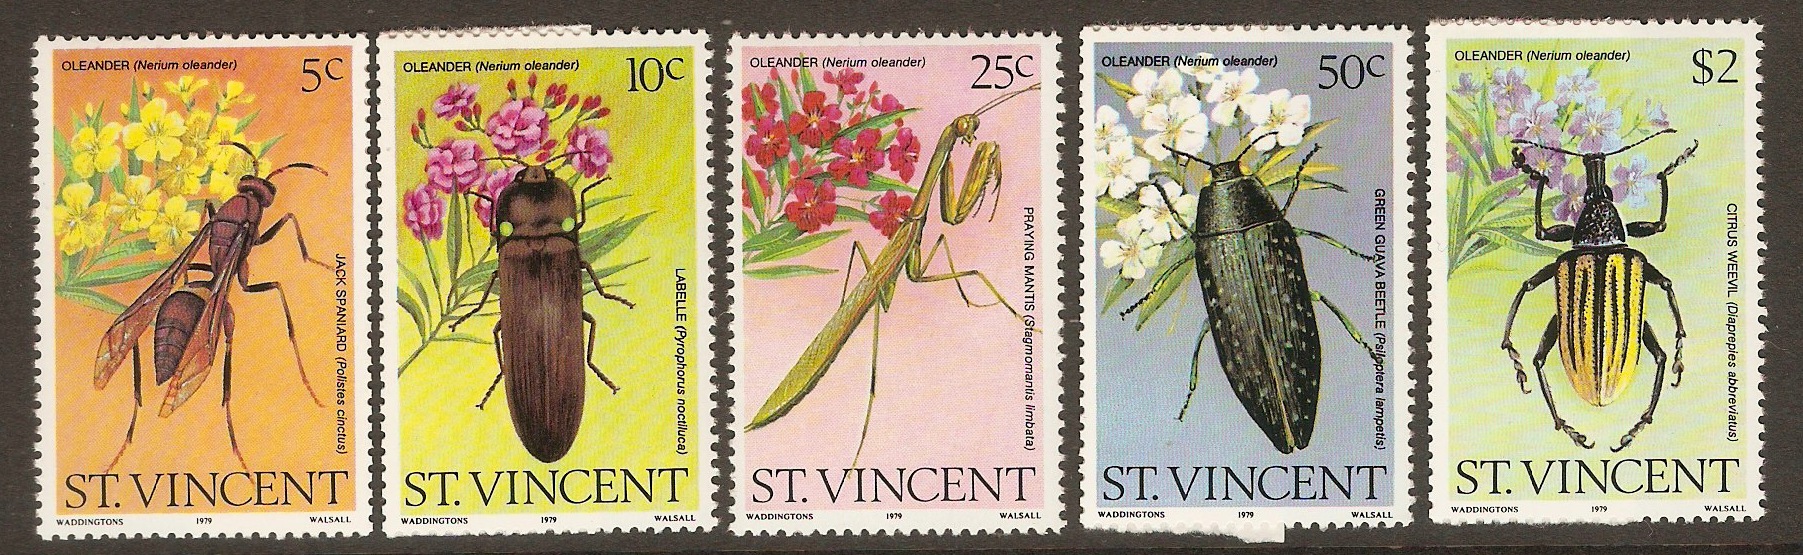 St Vincent 1979 Flowers and Insects set. SG628-SG632.